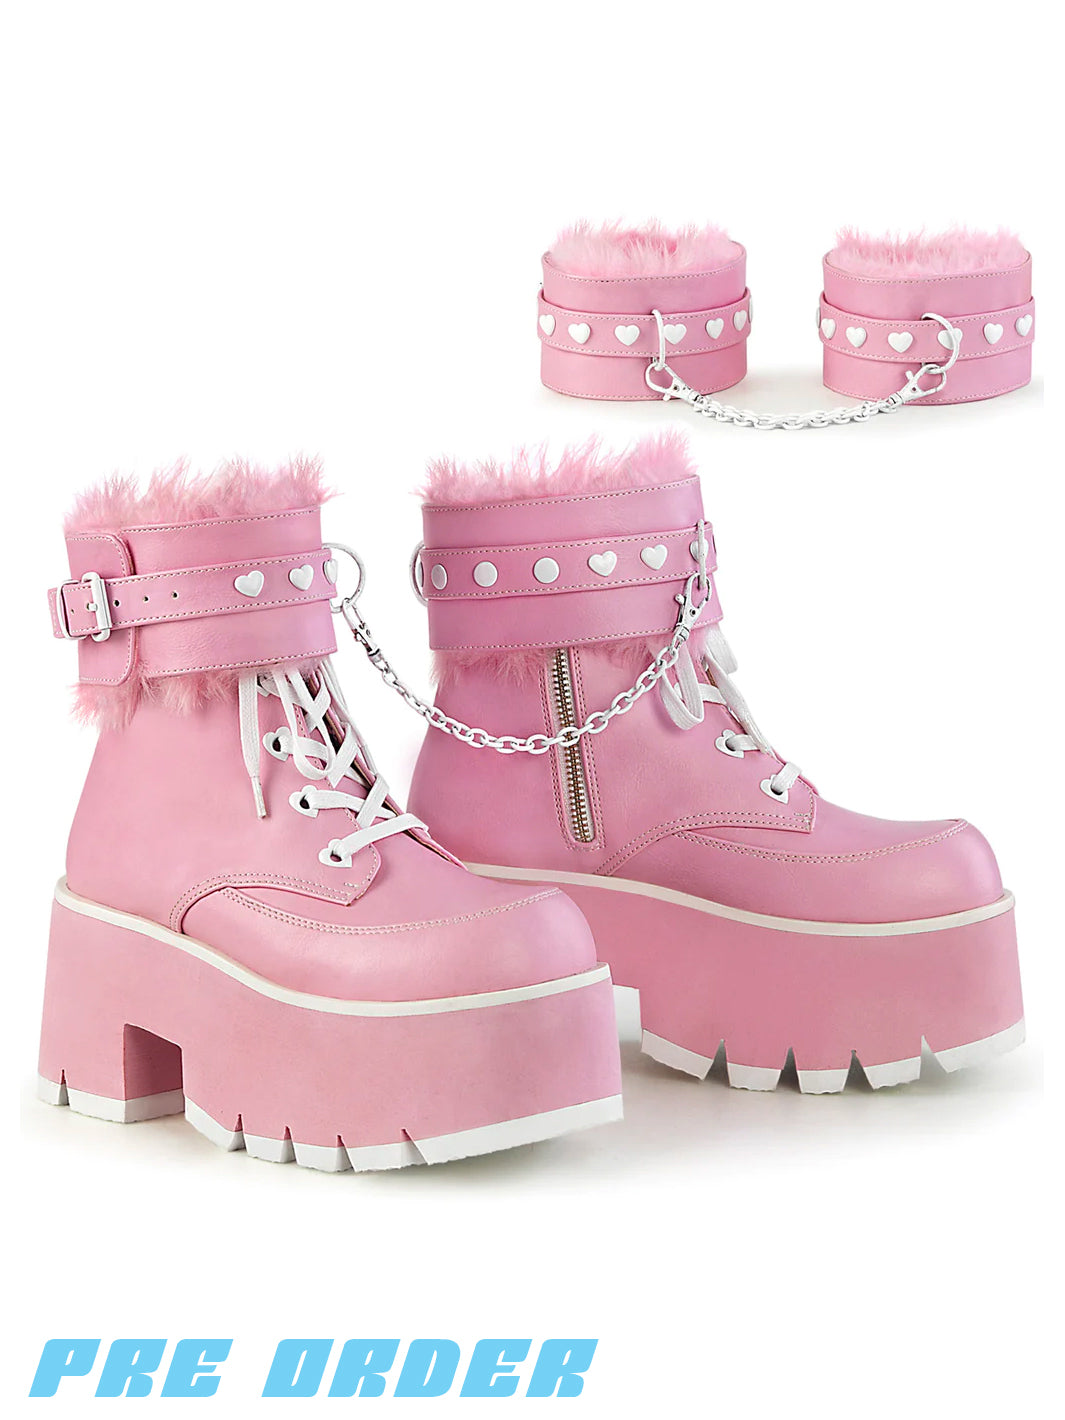 DEMONIA ASHES-57 BOOTS - PINK VEGAN LEATHER ✰ PRE ORDER ✰